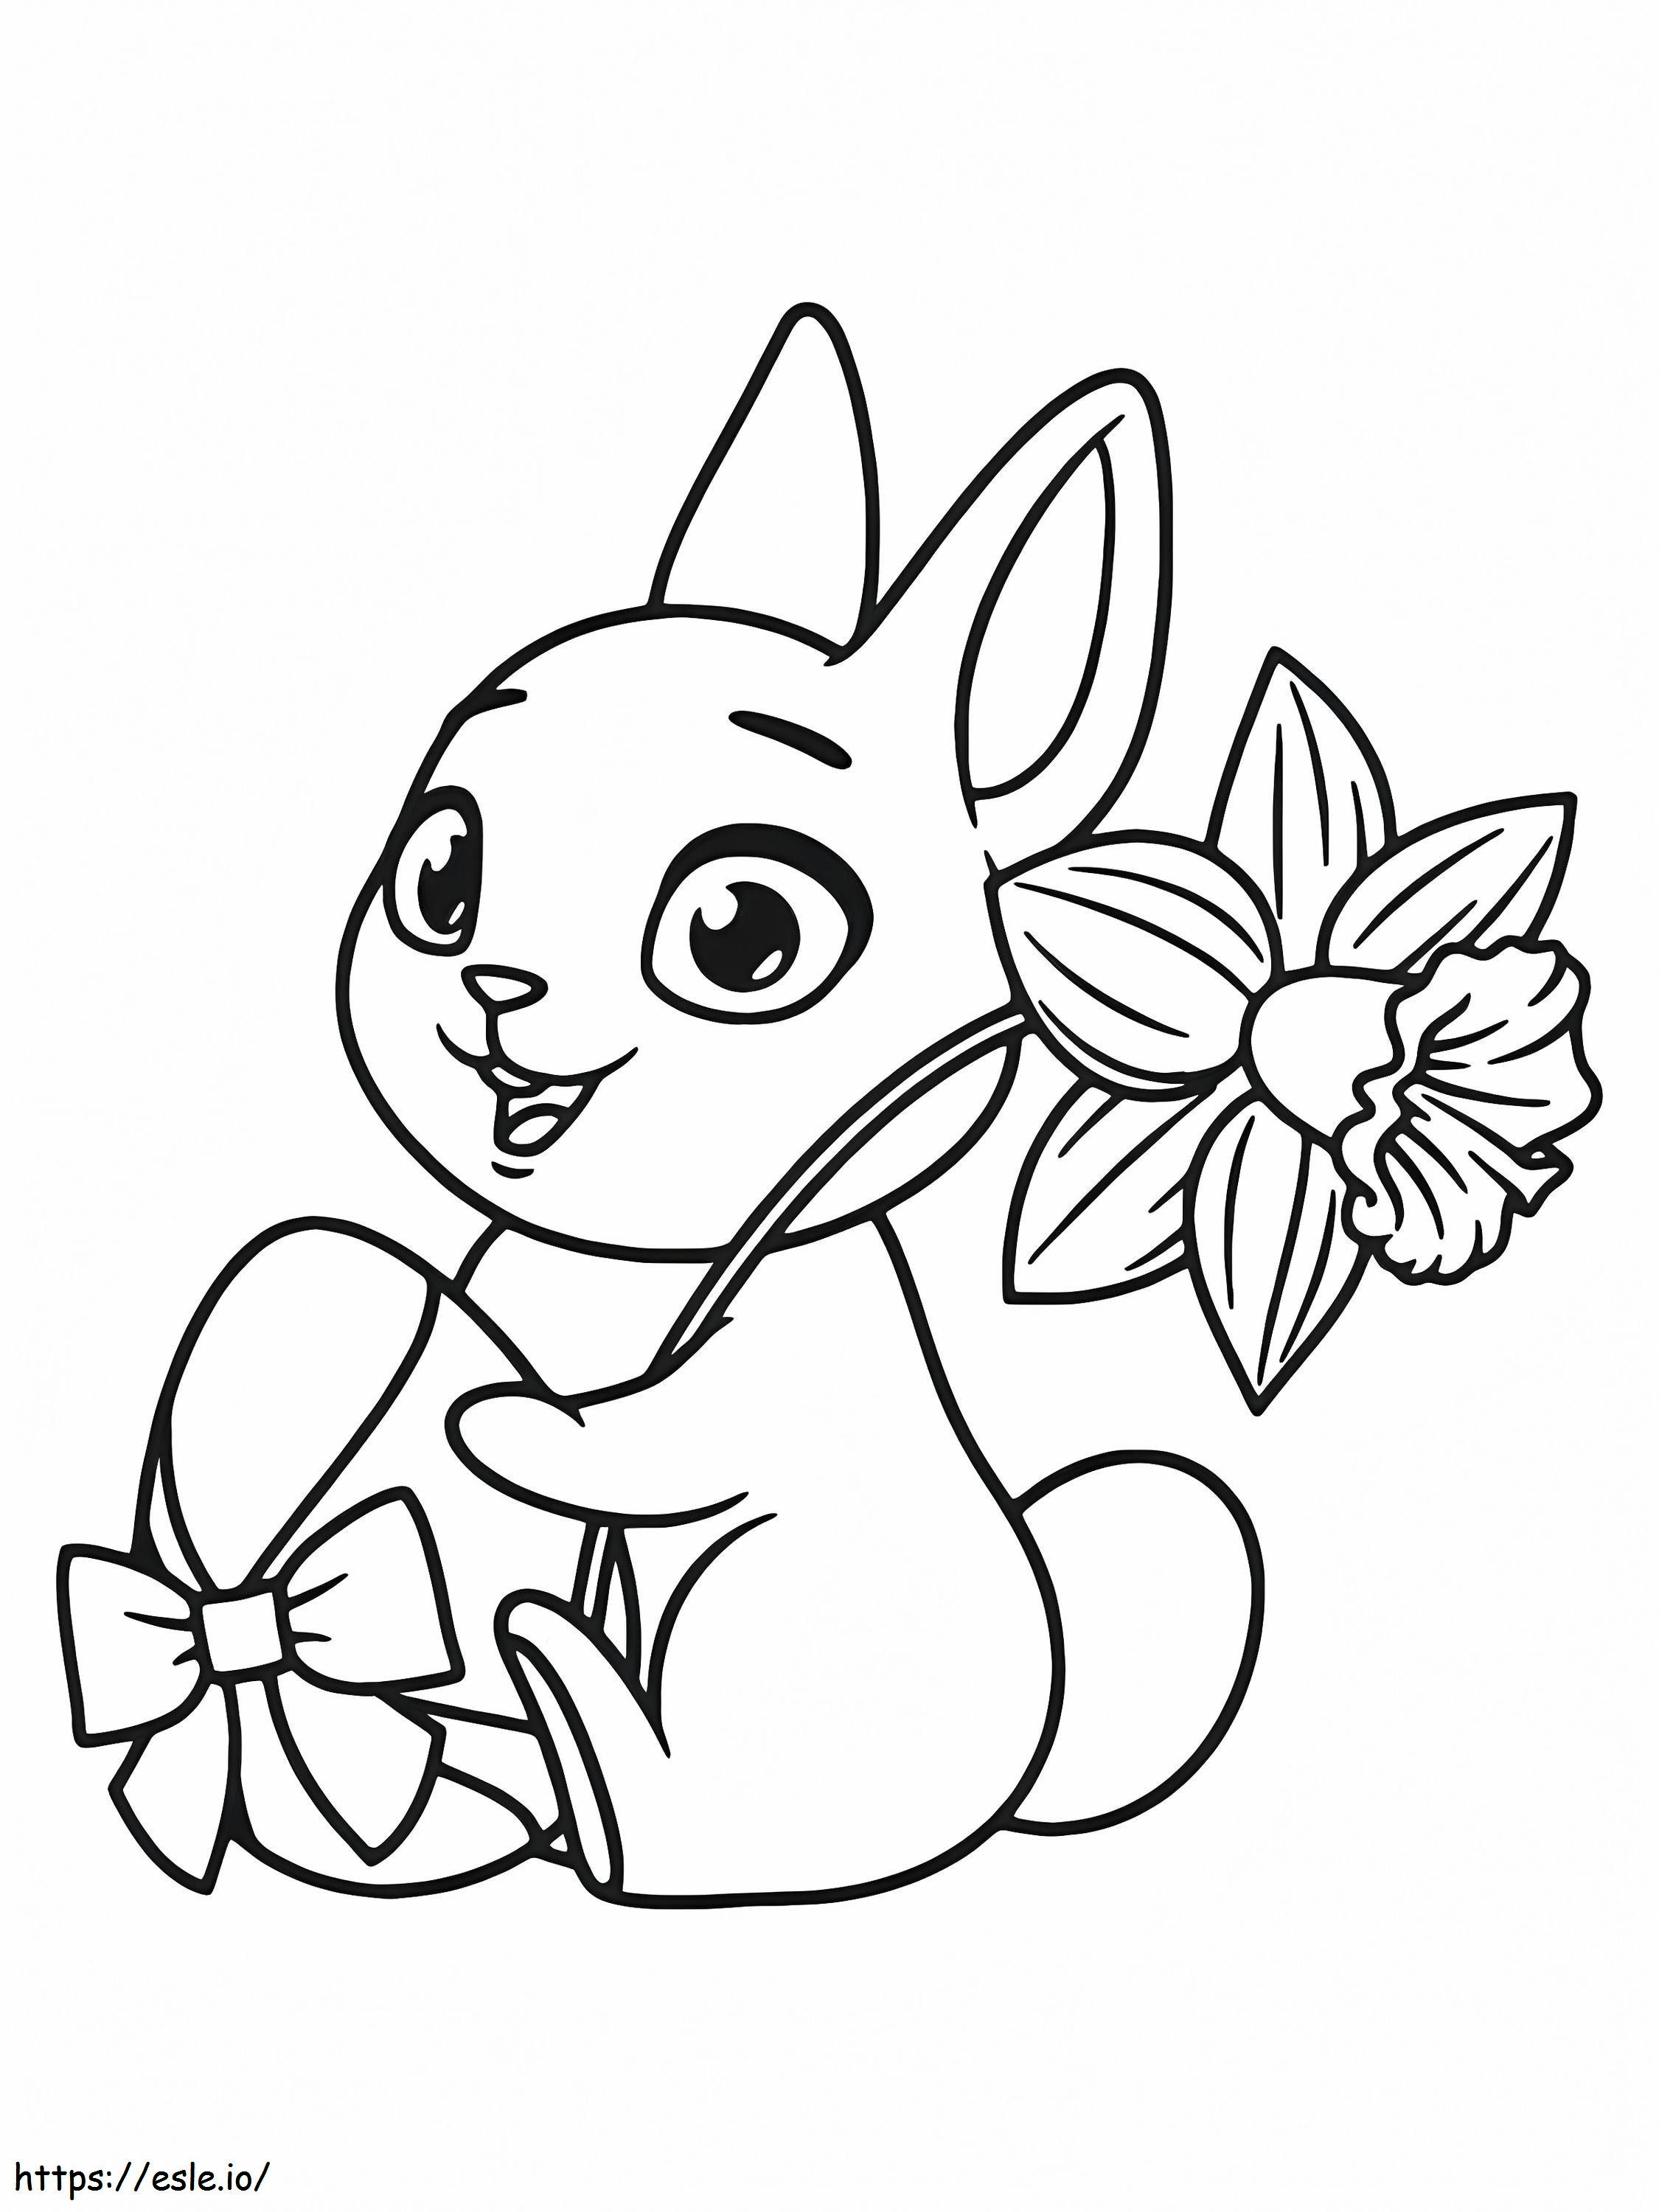 Lovely Easter Bunny Holding A Flower coloring page